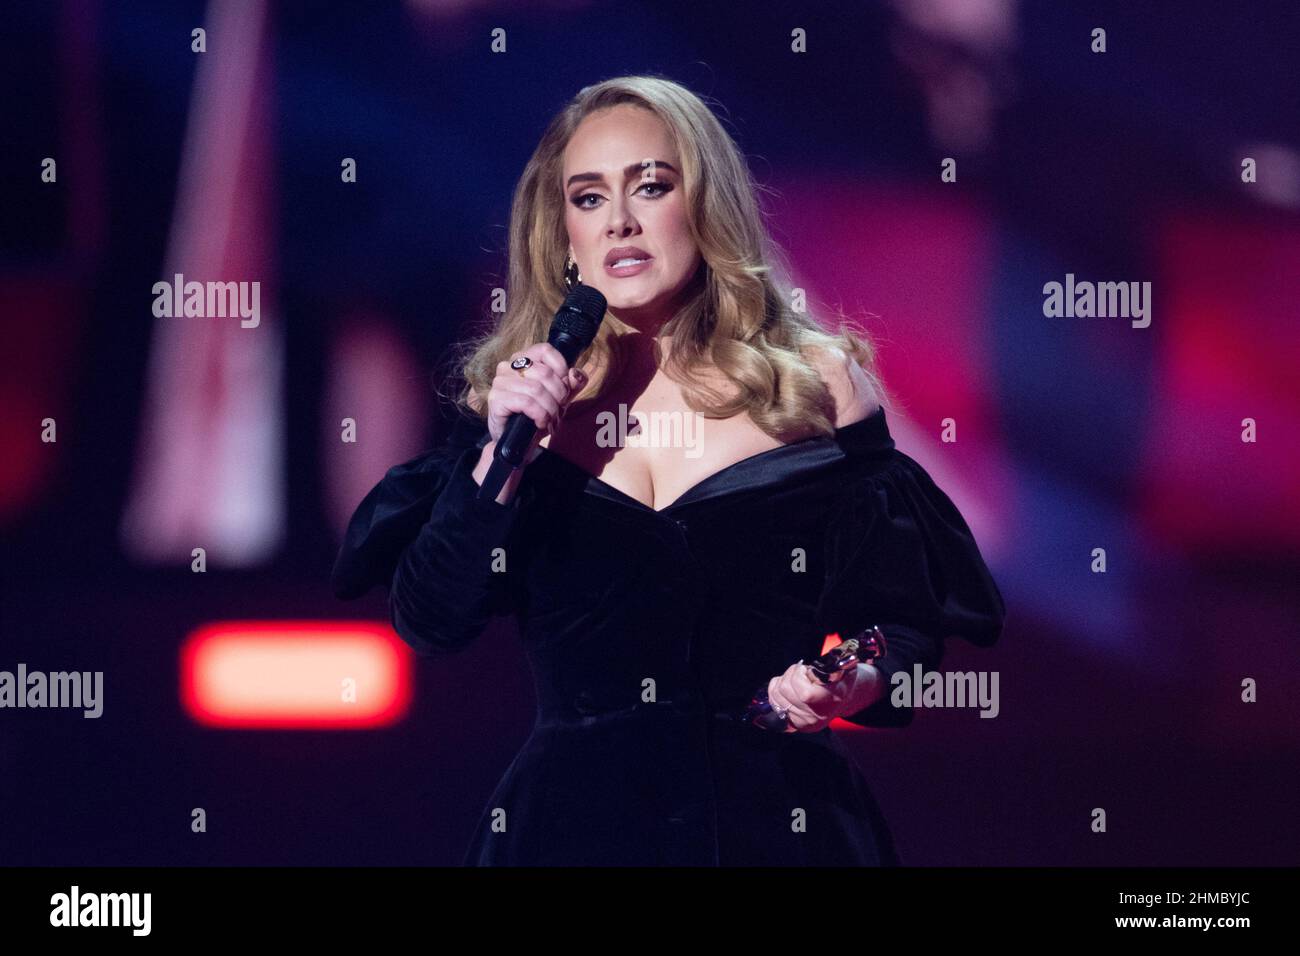 London, UK. 8 February 2022. Adele on stage during the the Brit Awards 2022 at the O2 Arena, London. Picture date: Wednesday February 9, 2022. Photo credit should read: Matt Crossick/Empics/Alamy Live News. EDITORIAL USE ONLY. NO MERCHANDISING. Stock Photo